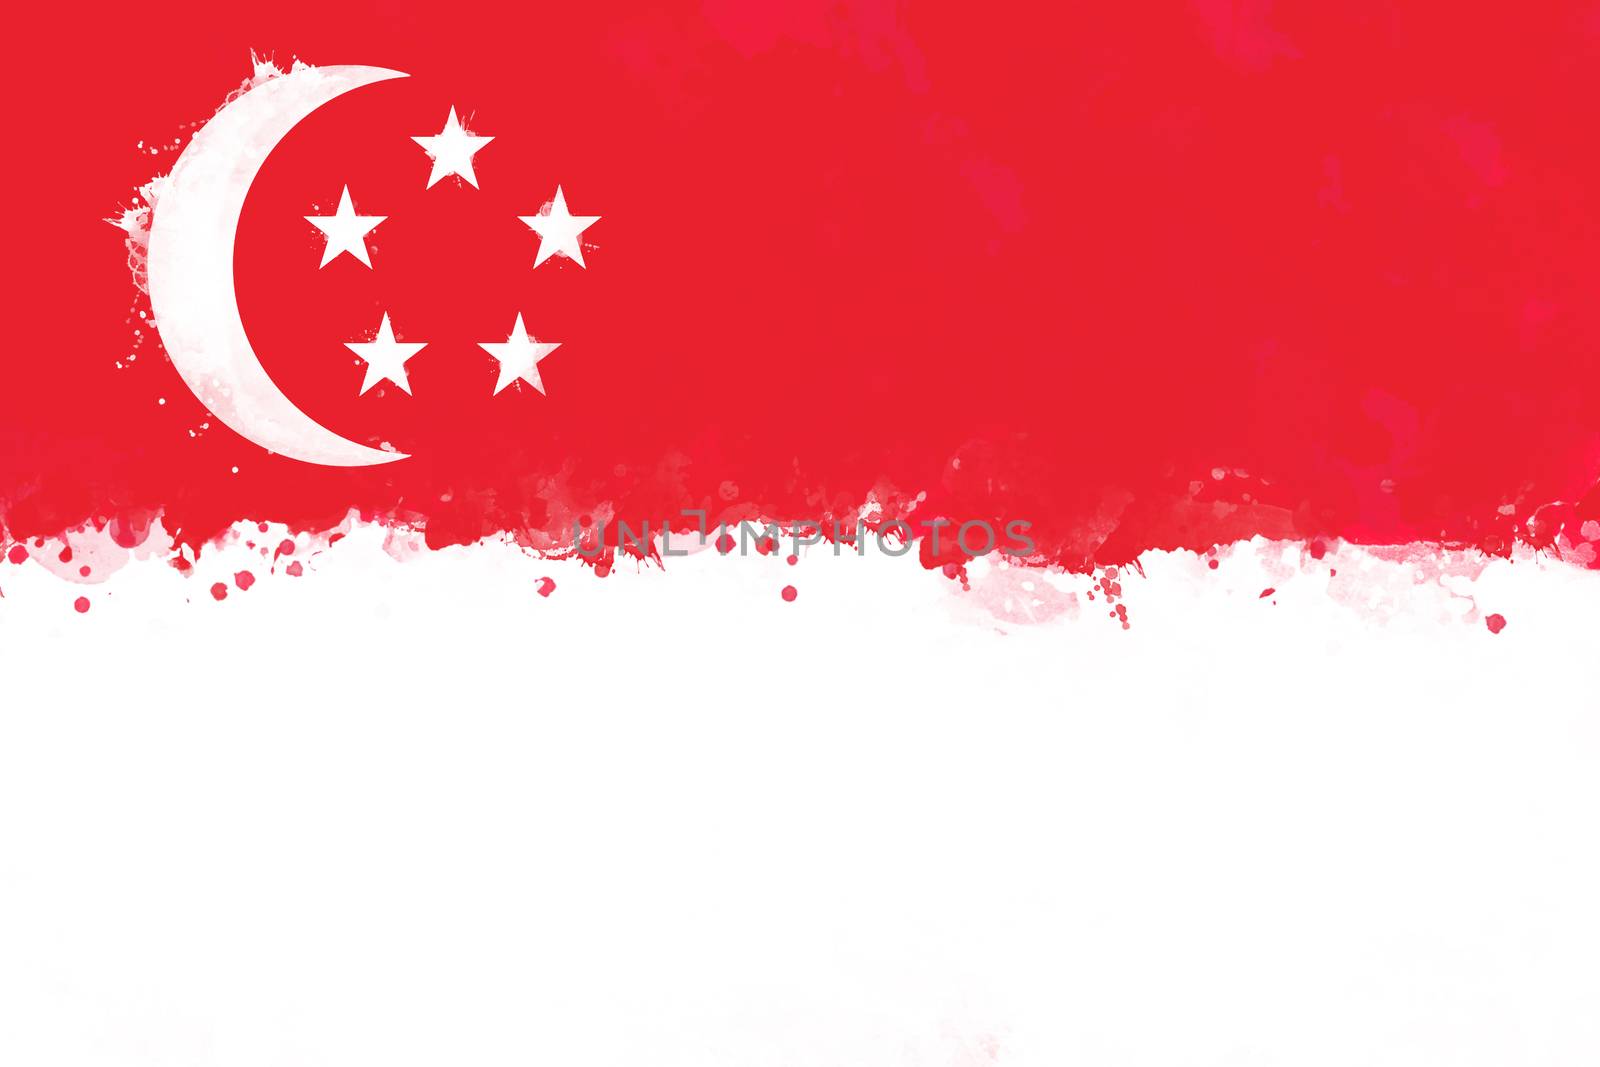 Flag of Singapore by watercolor paint brush, grunge style by asiandelight